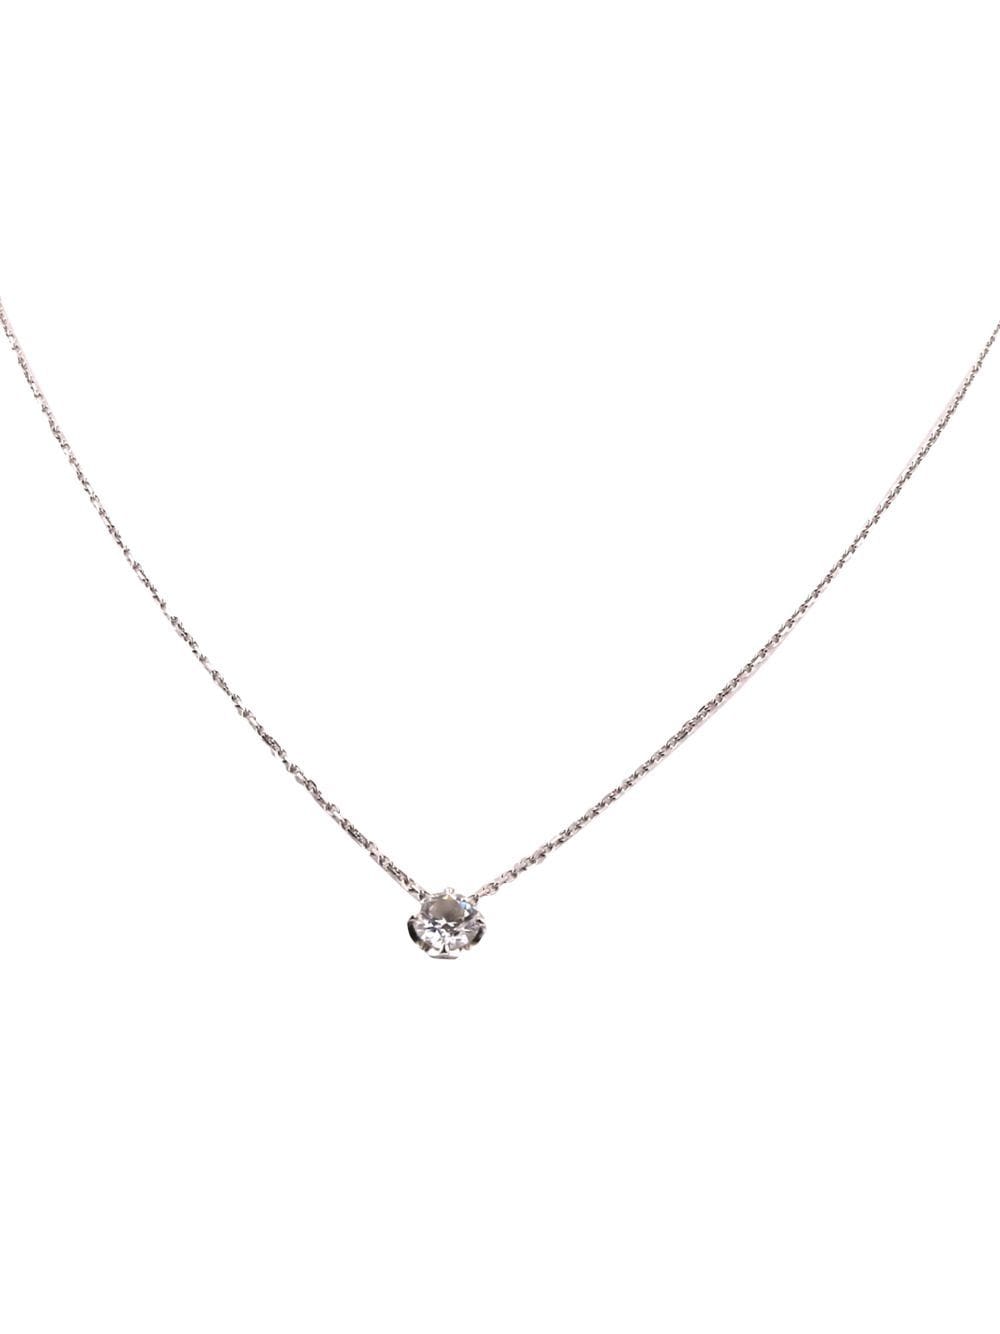 Fred pre-owned 18kt white gold Delphine diamond necklace